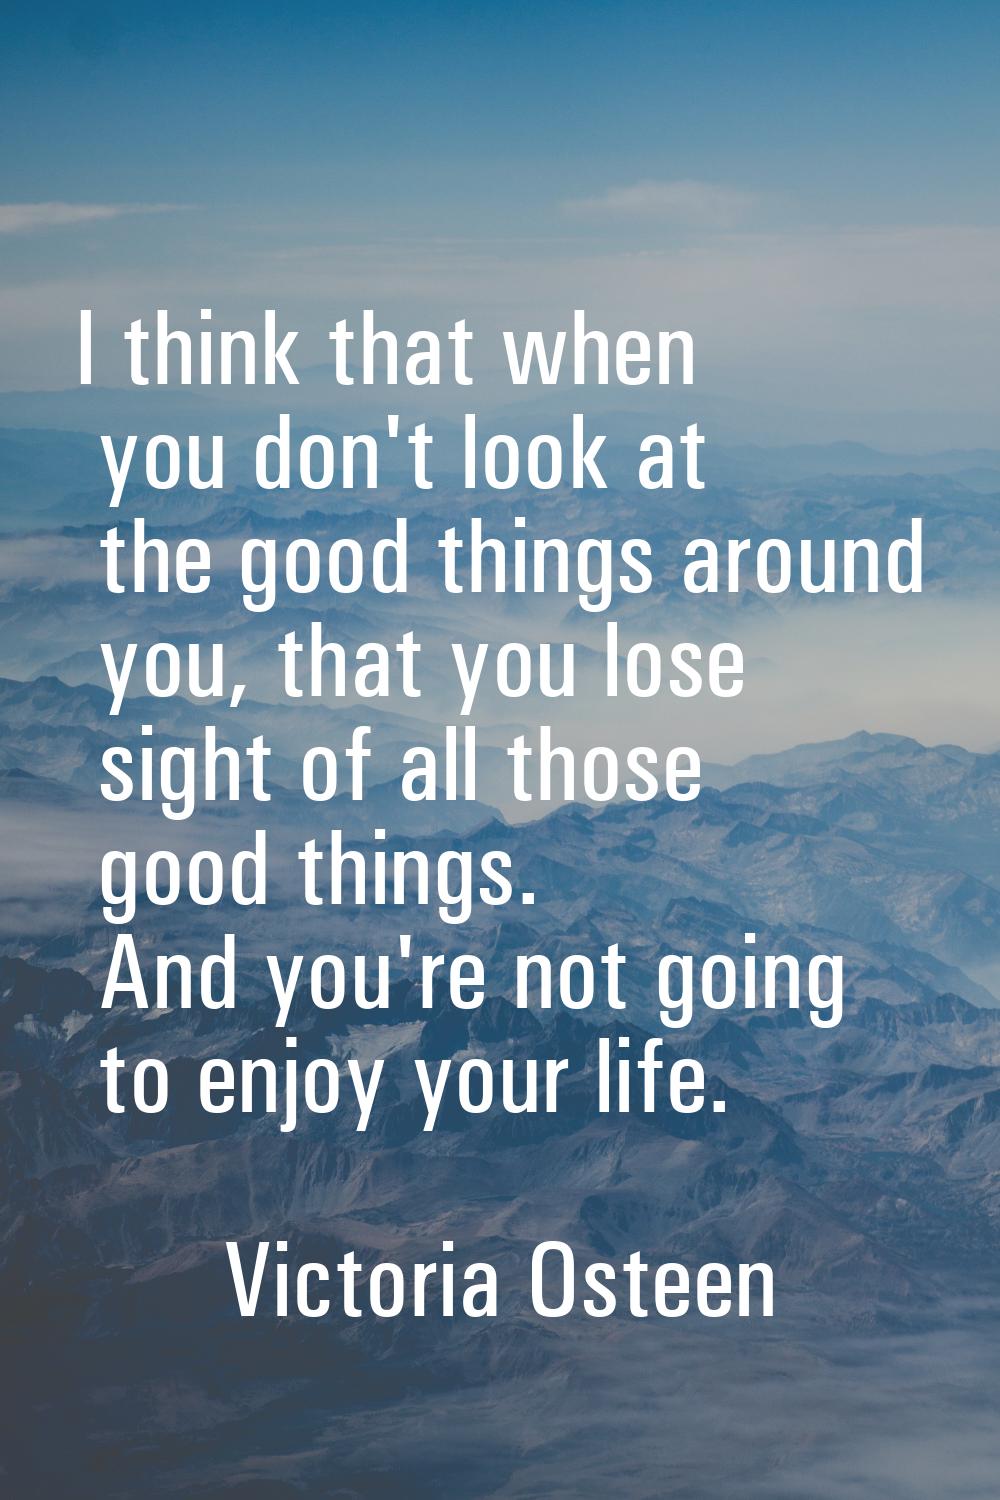 I think that when you don't look at the good things around you, that you lose sight of all those go